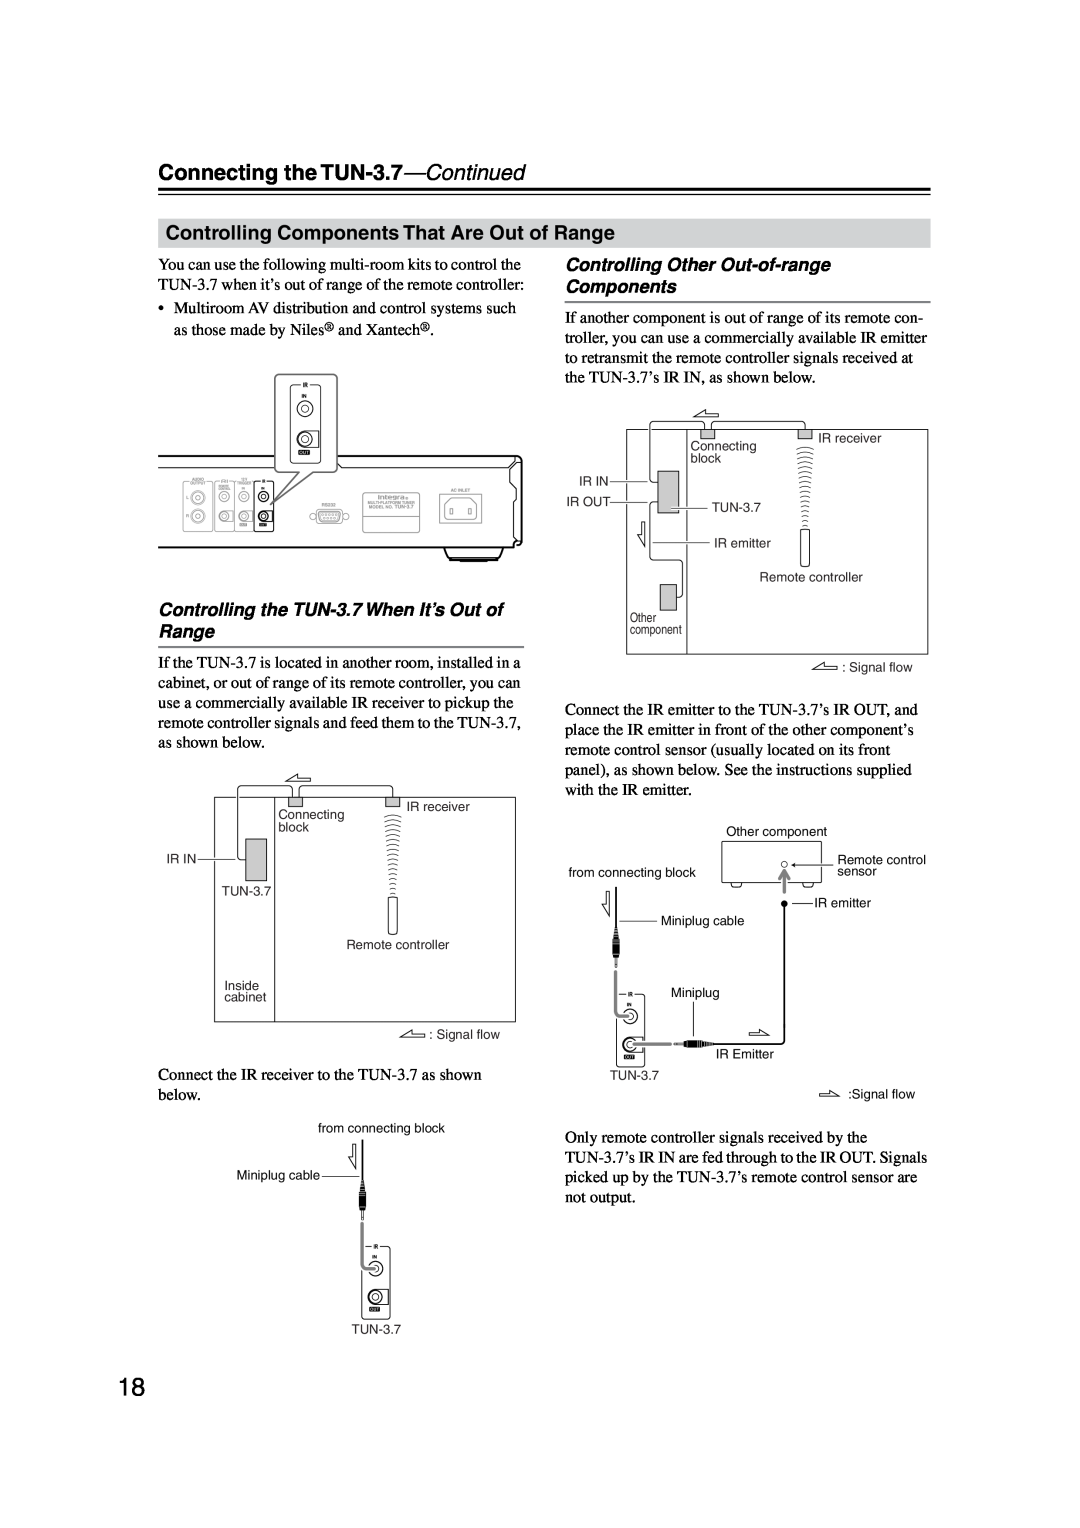 Integra instruction manual Controlling Components That Are Out of Range, Connecting the TUN-3.7-Continued 